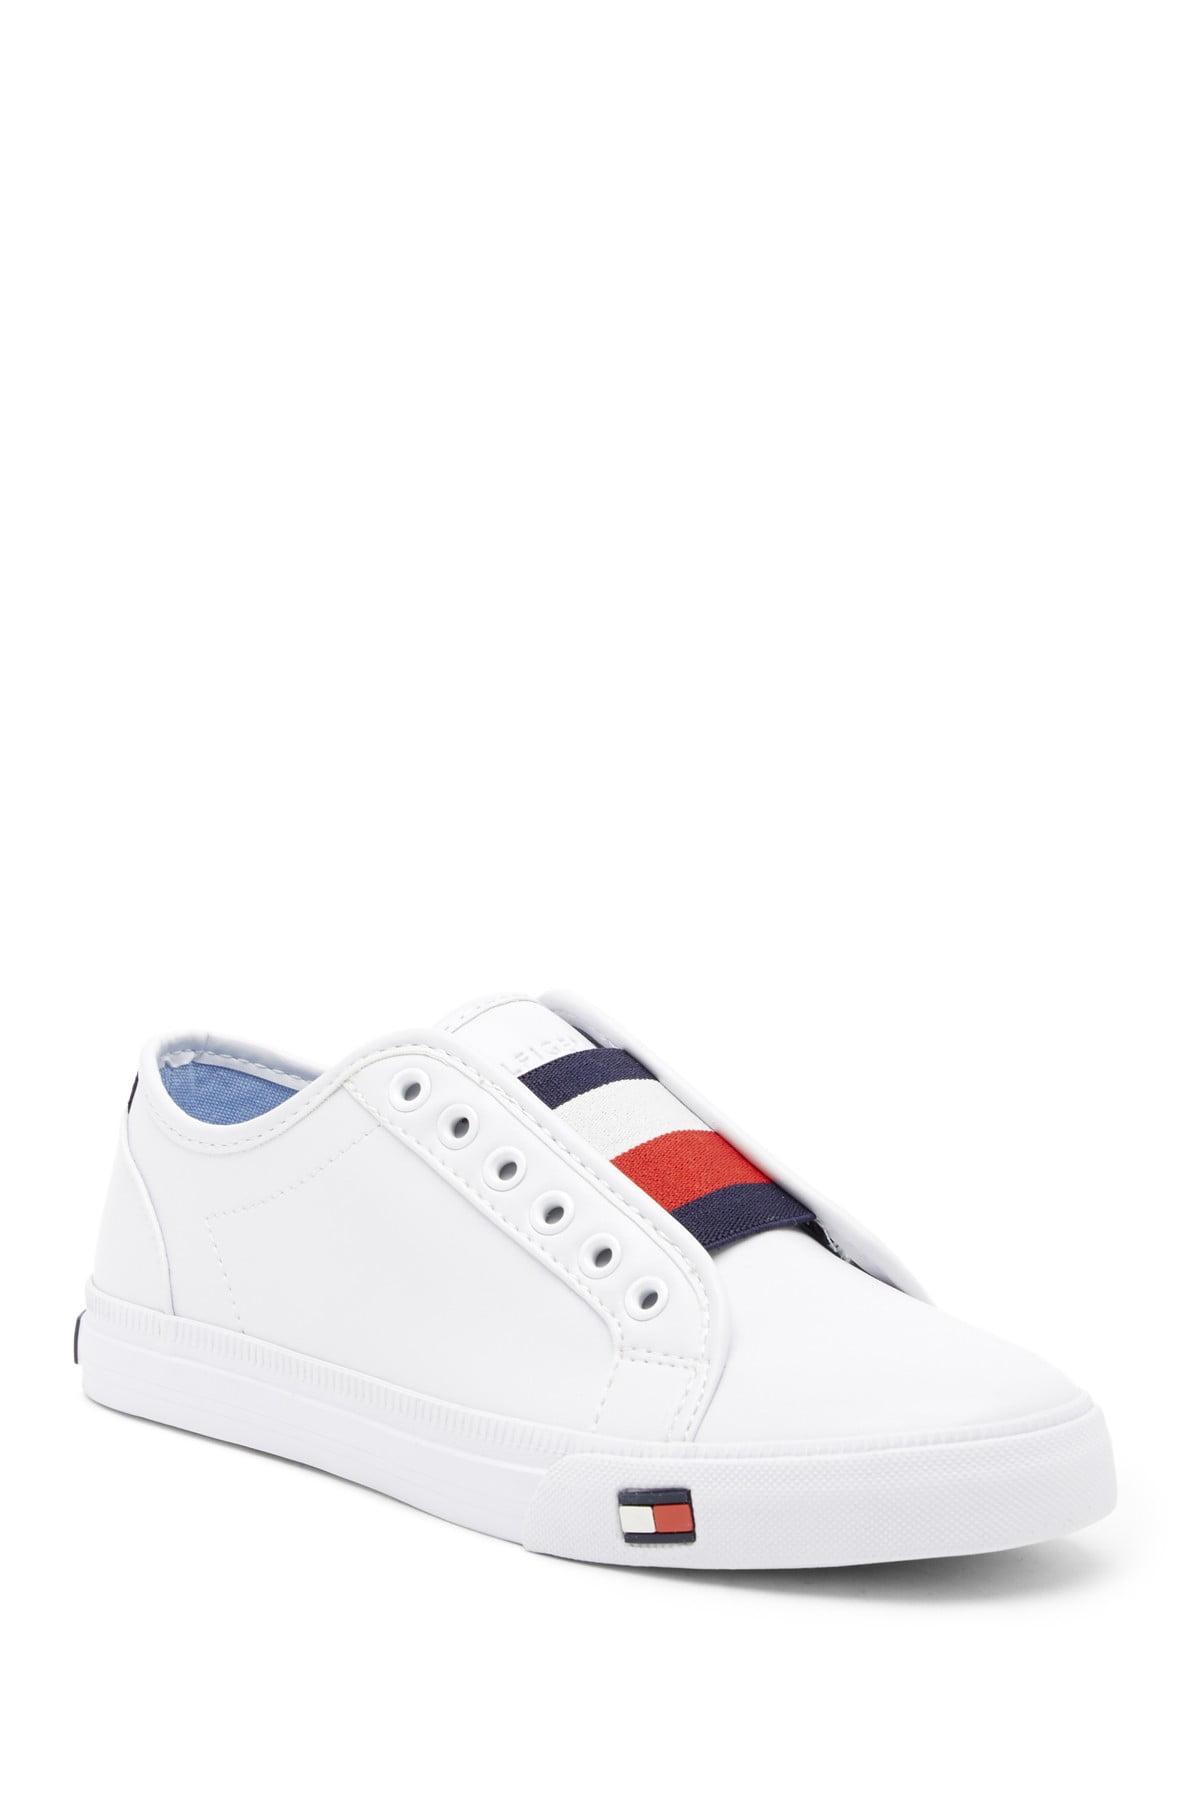 Bishop Subjective lb Tommy Hilfiger No Lace Shoes Norway, SAVE 30% - aveclumiere.com